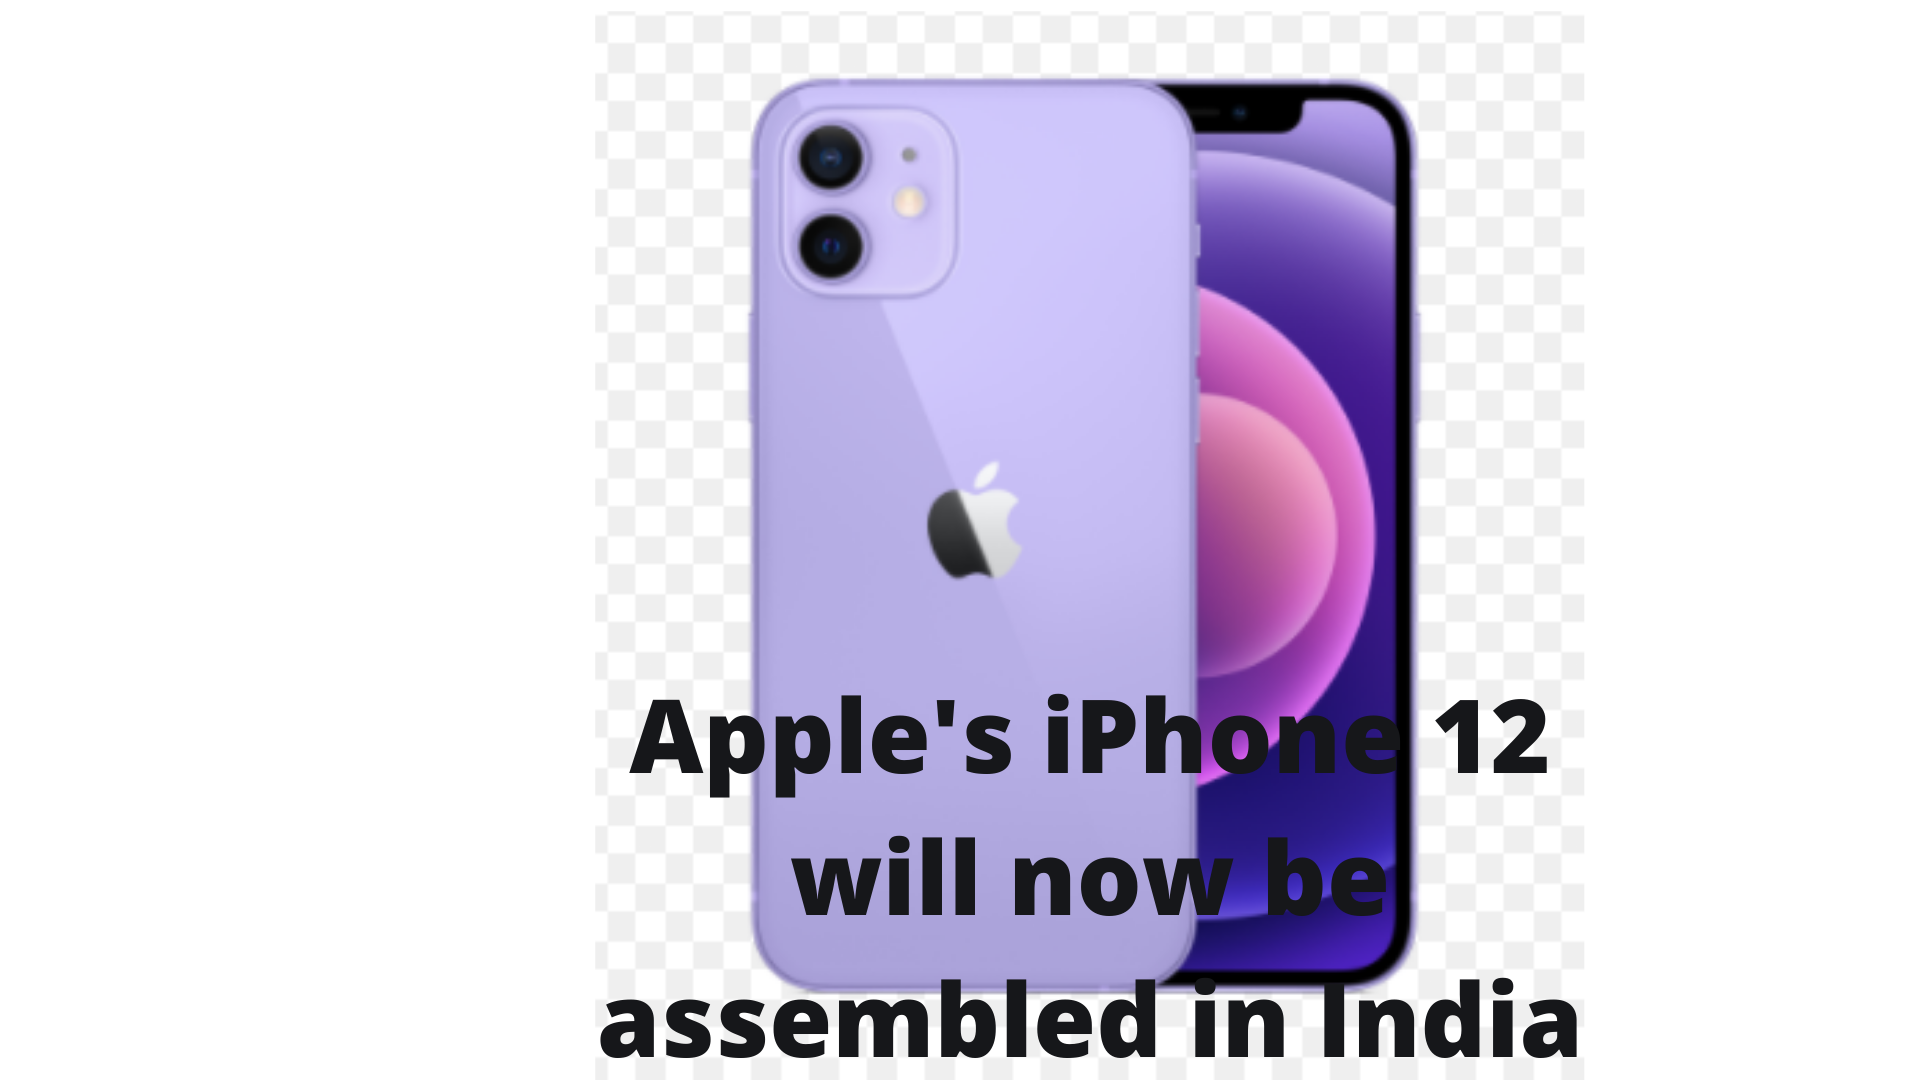 Apple's iPhone 12 will now be assembled in India